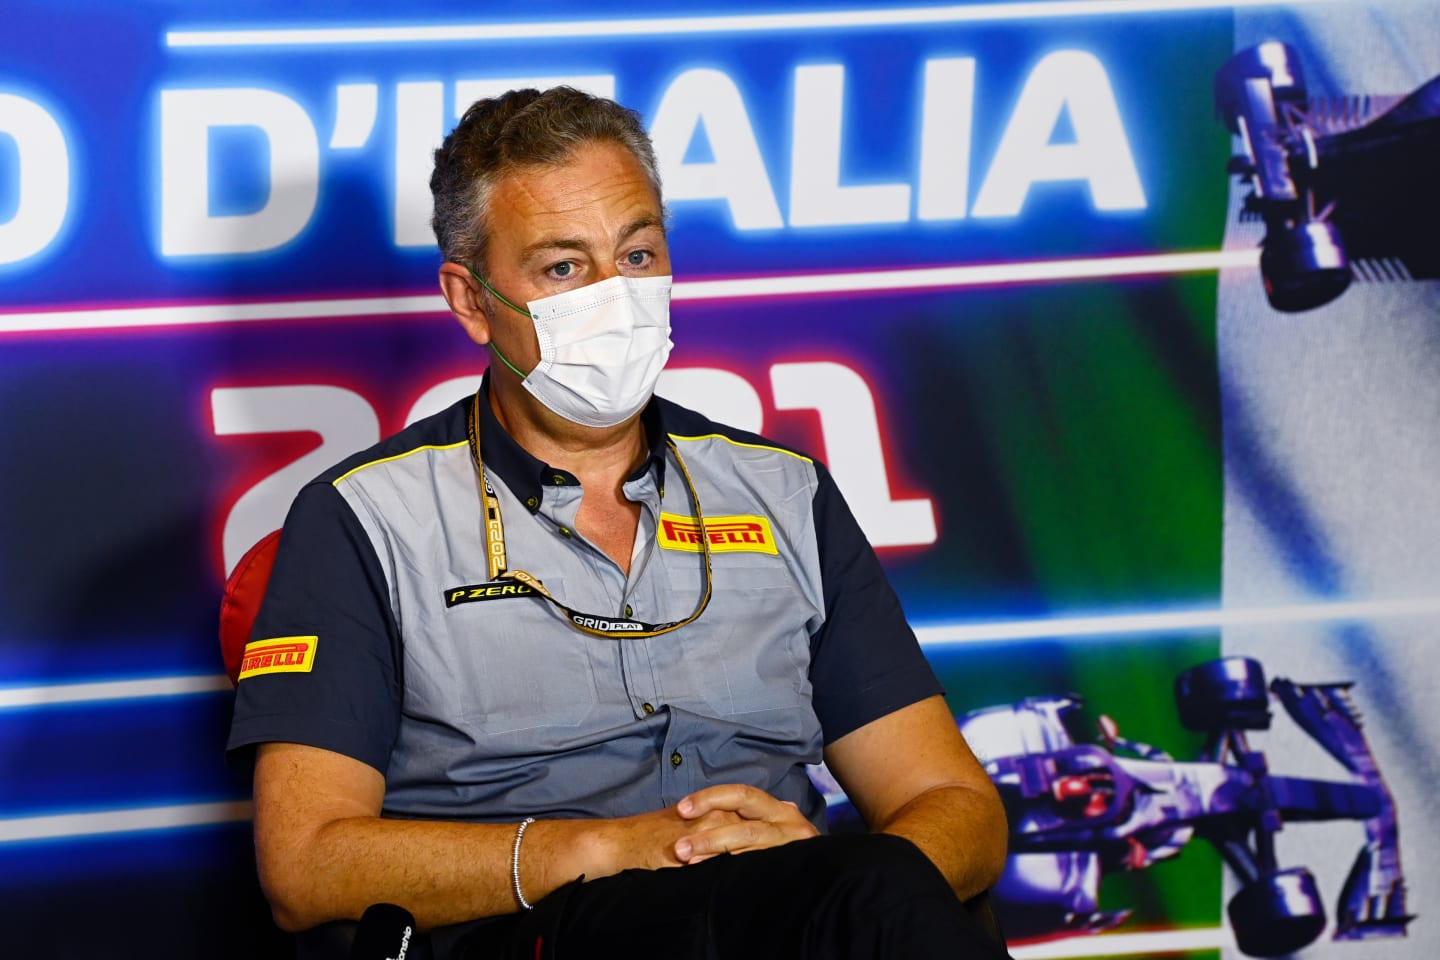 MONZA, ITALY - SEPTEMBER 10: Director of Pirelli F1 Mario Isola talks in the Team Principals Press Conference during practice ahead of the F1 Grand Prix of Italy at Autodromo di Monza on September 10, 2021 in Monza, Italy. (Photo by Mark Sutton - Pool/Getty Images)